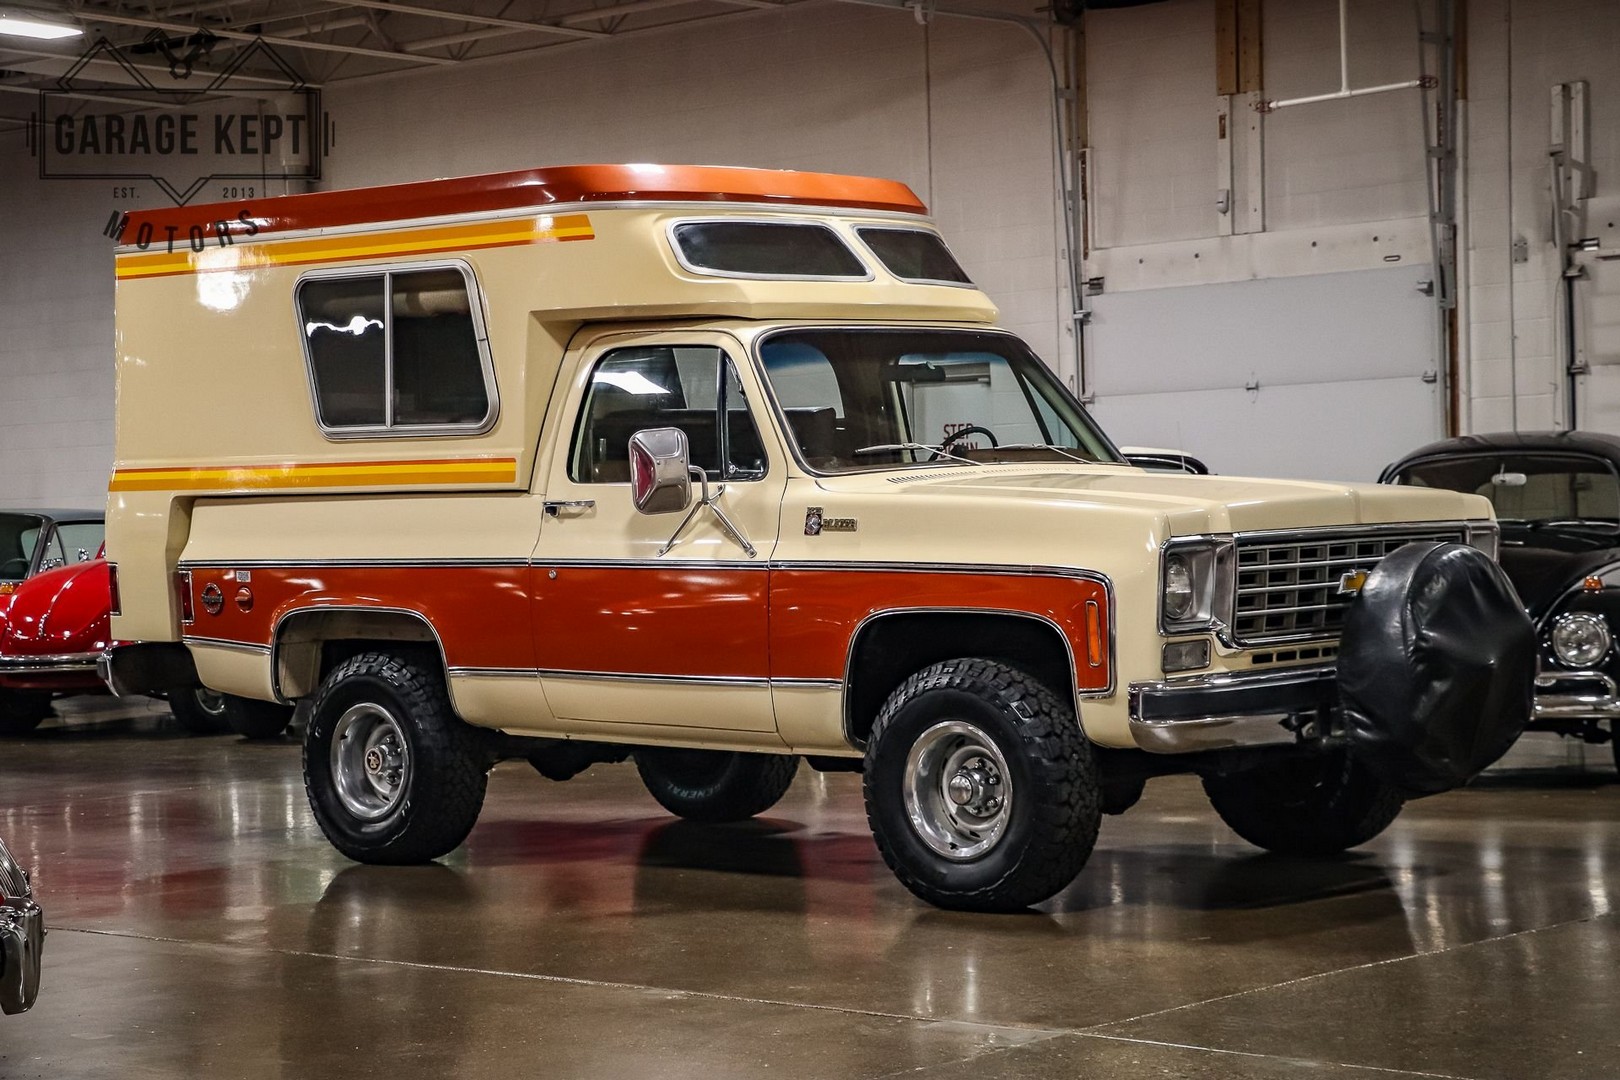 The rare Chevrolet K5 Blazer Chalet Camper offers a prime example of 1970s overlanding excellence